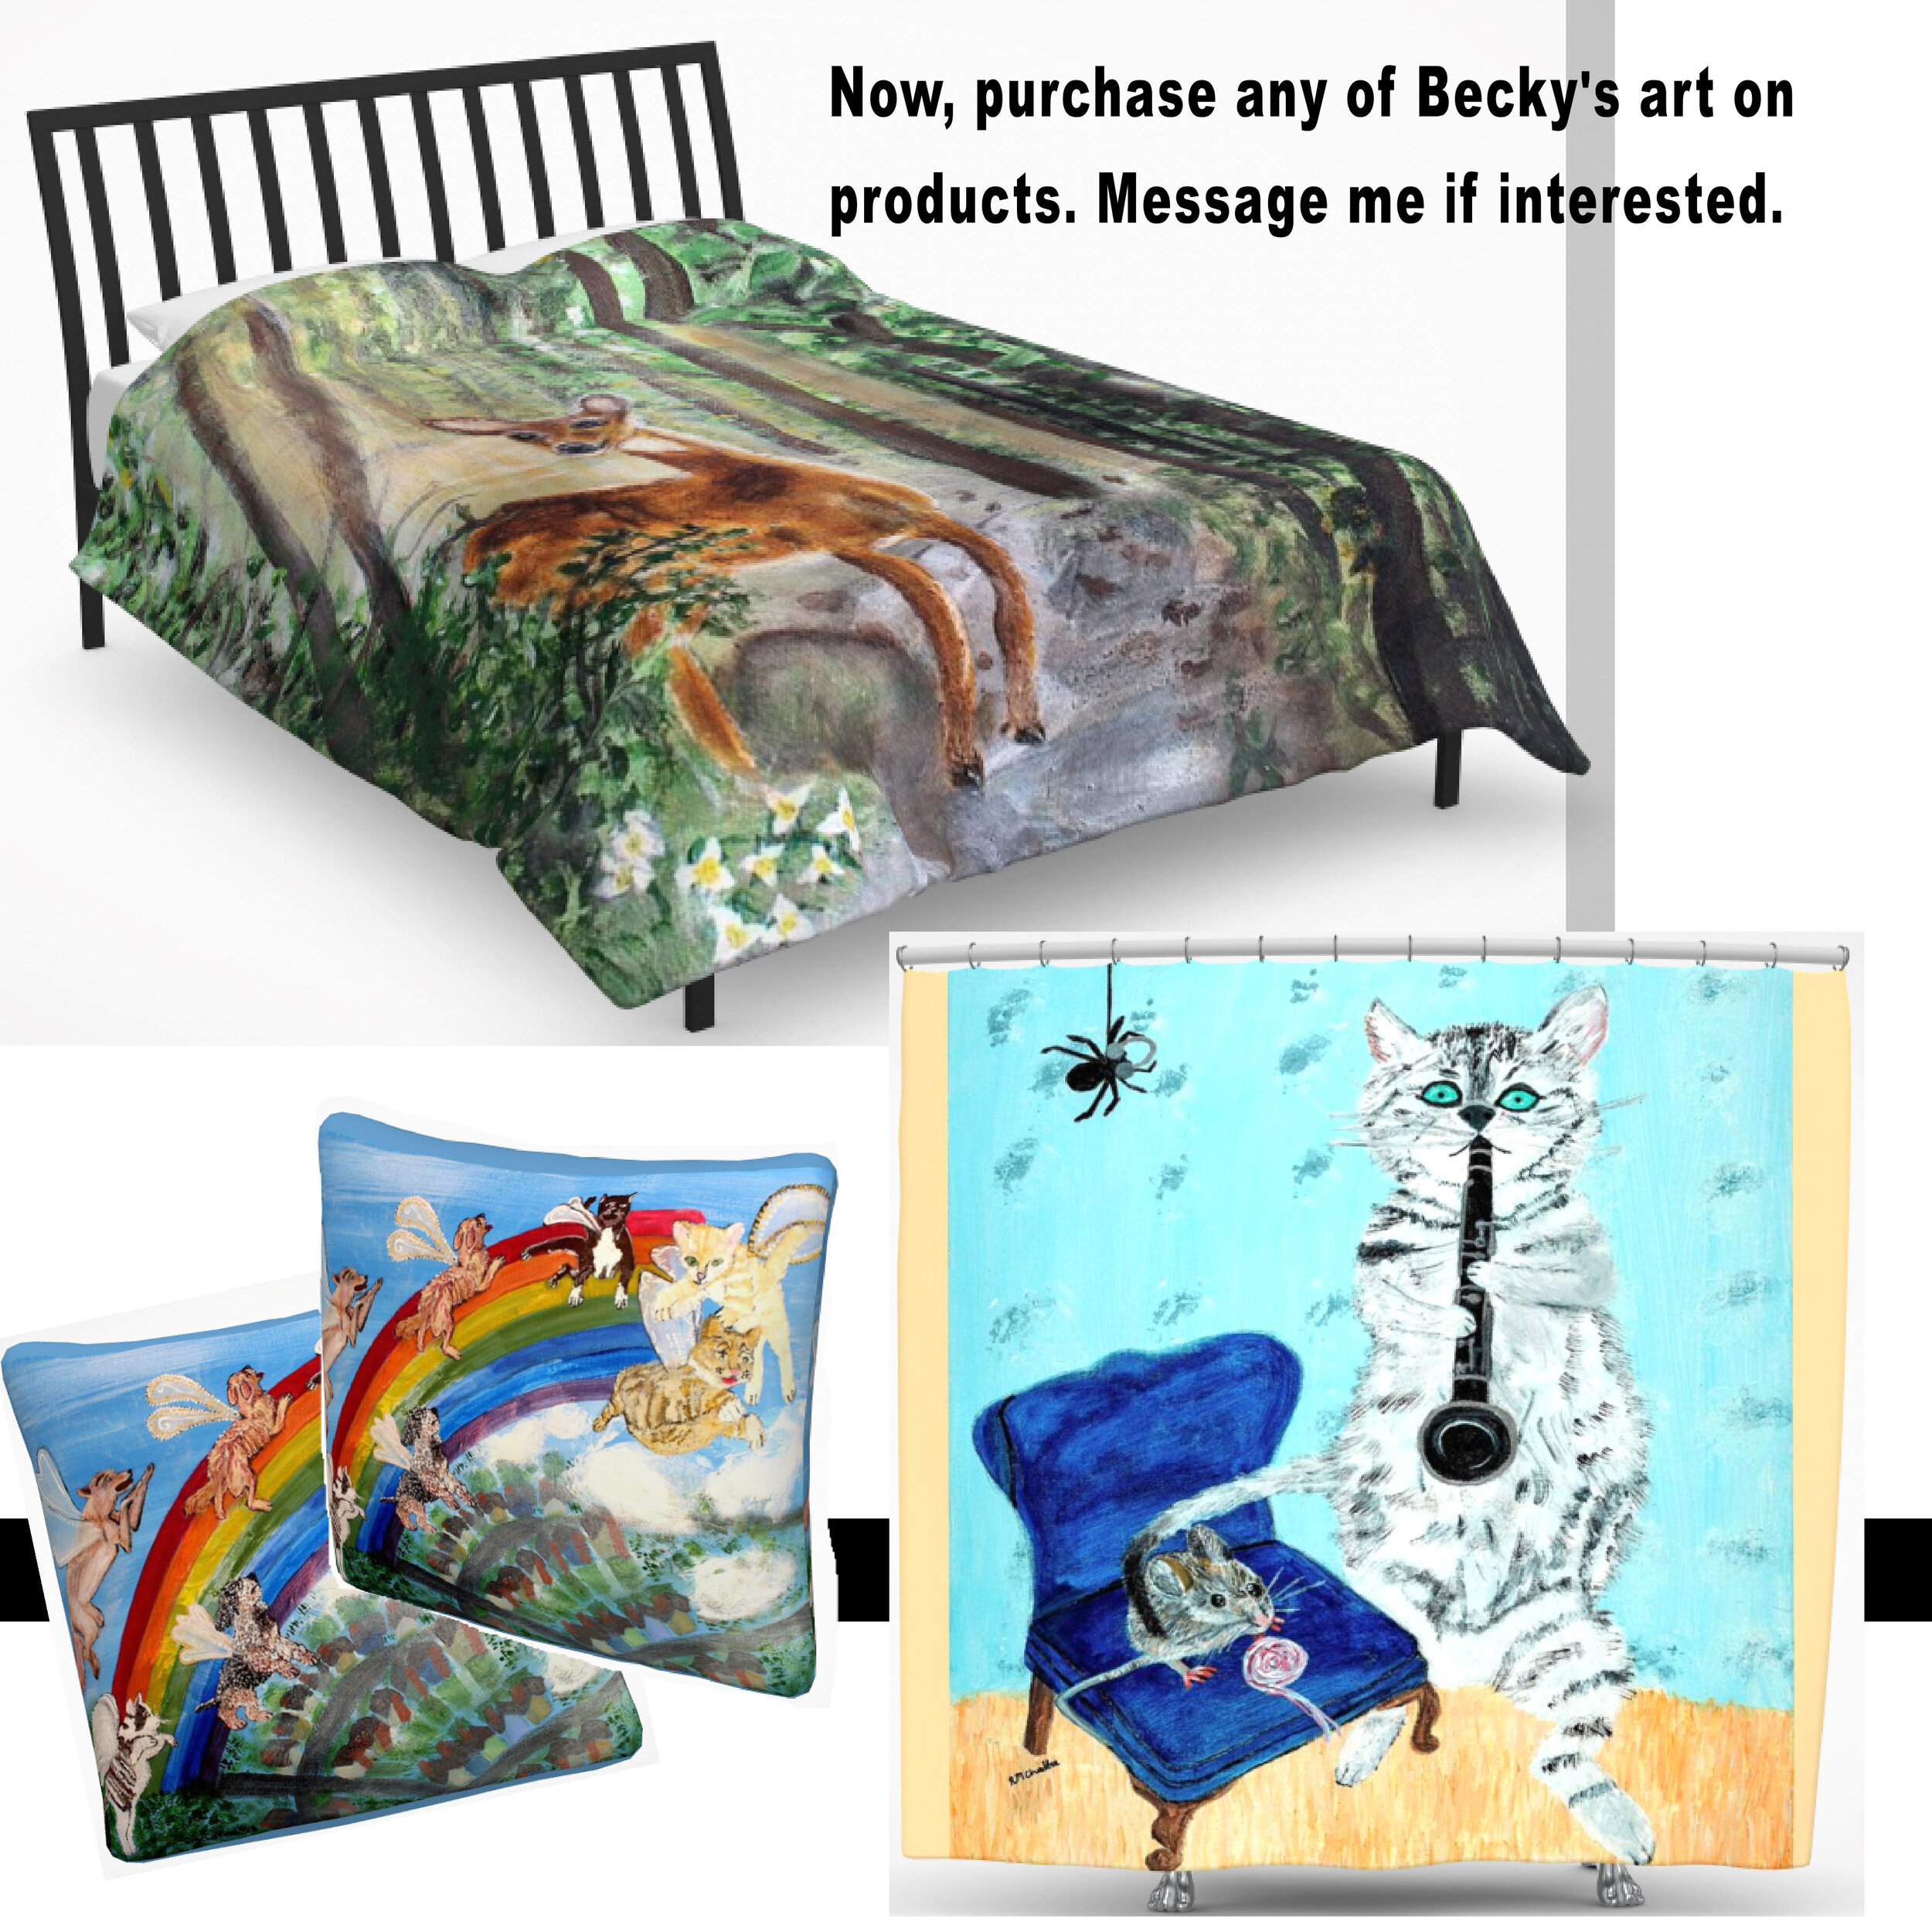 Becky's products on fine arts america.jpg